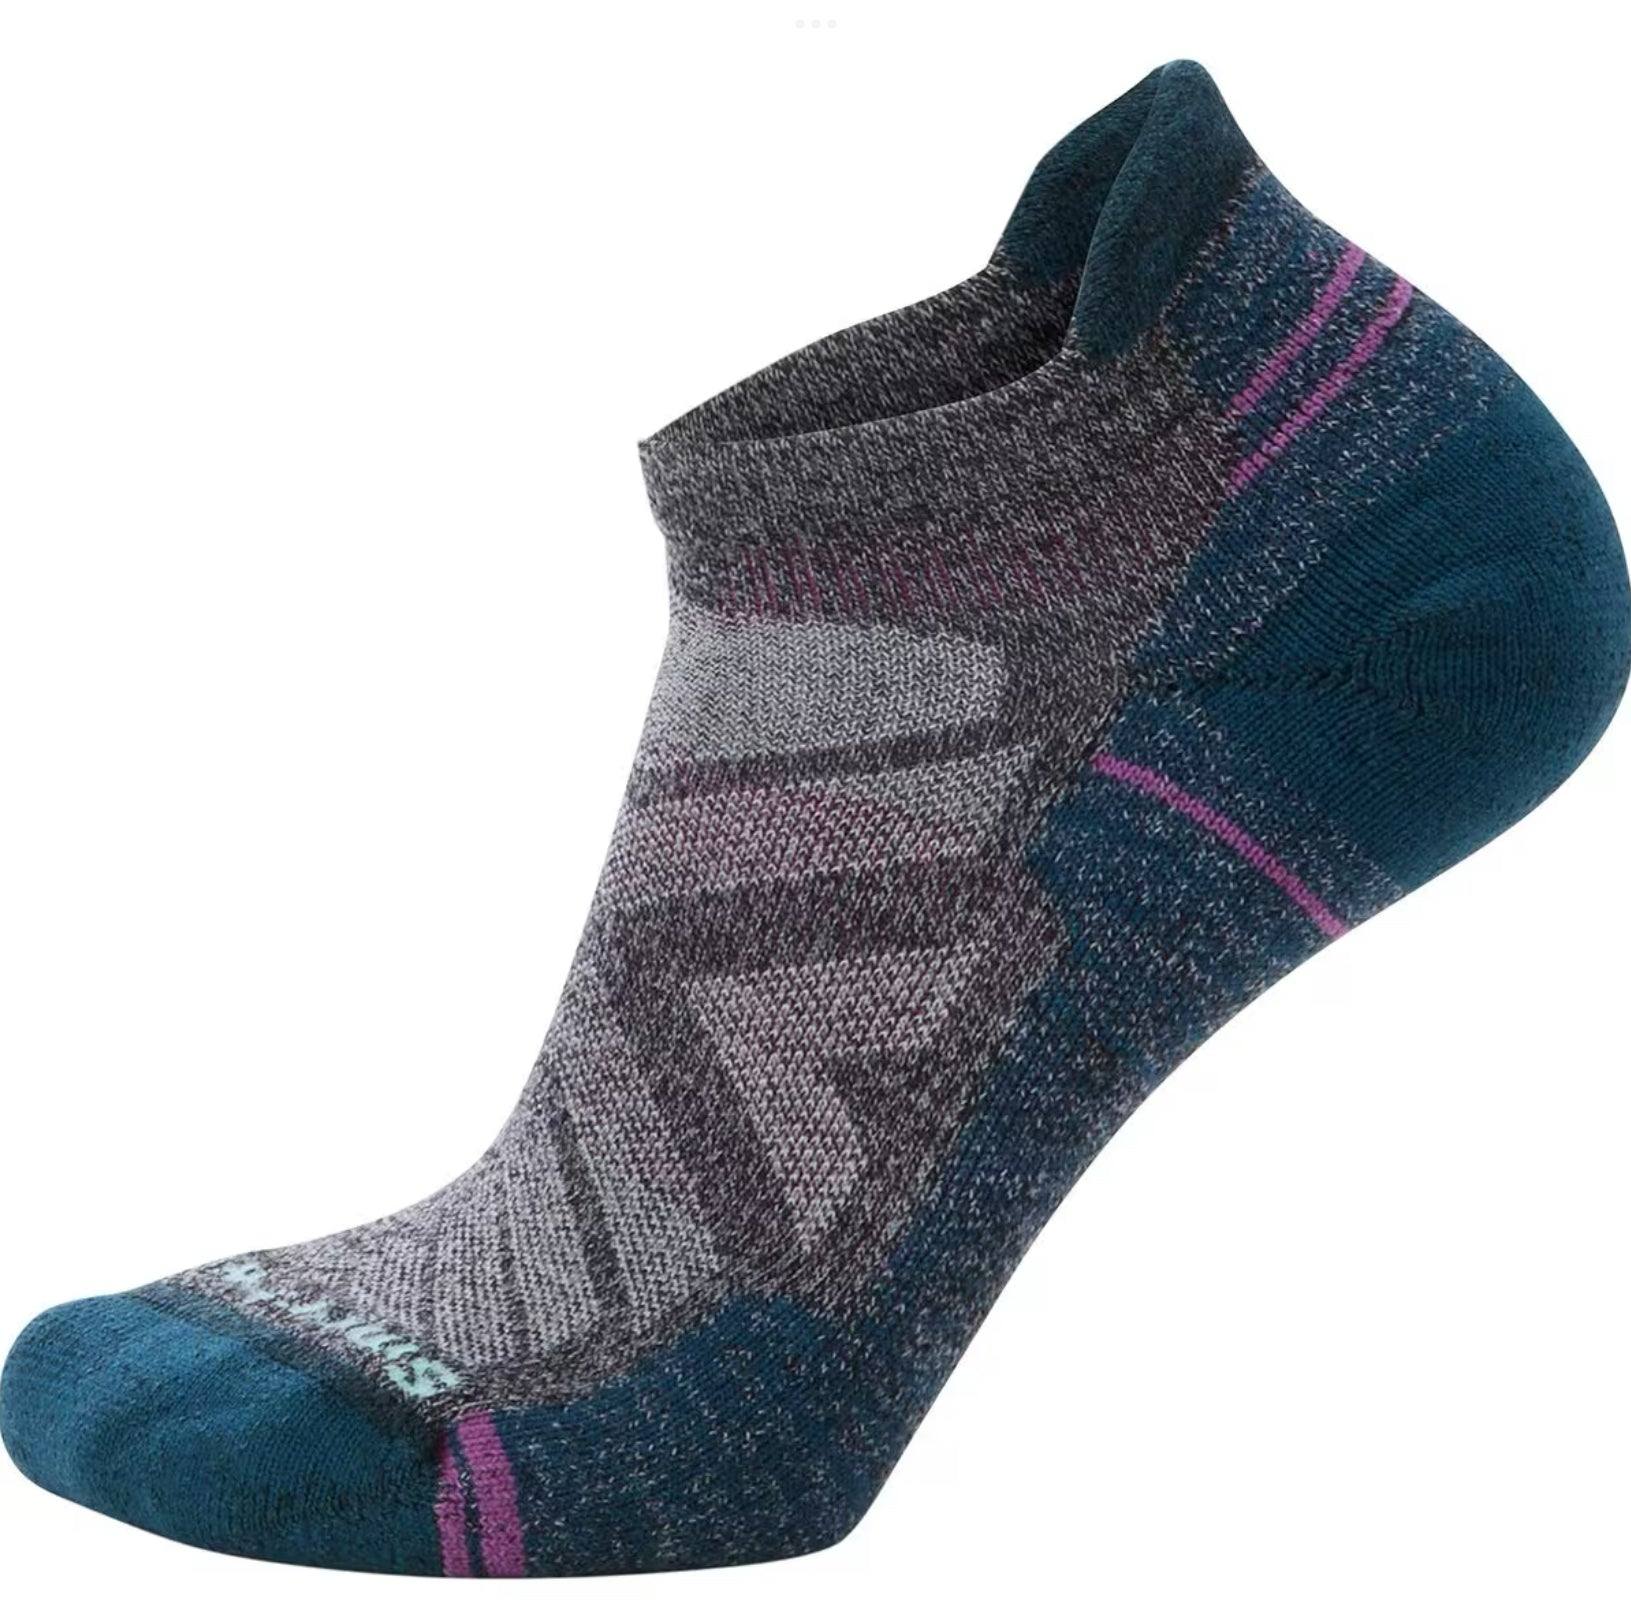 Women’s Hike Low Cushion Low Ankle Socks - The Shoe CollectiveSmartwool